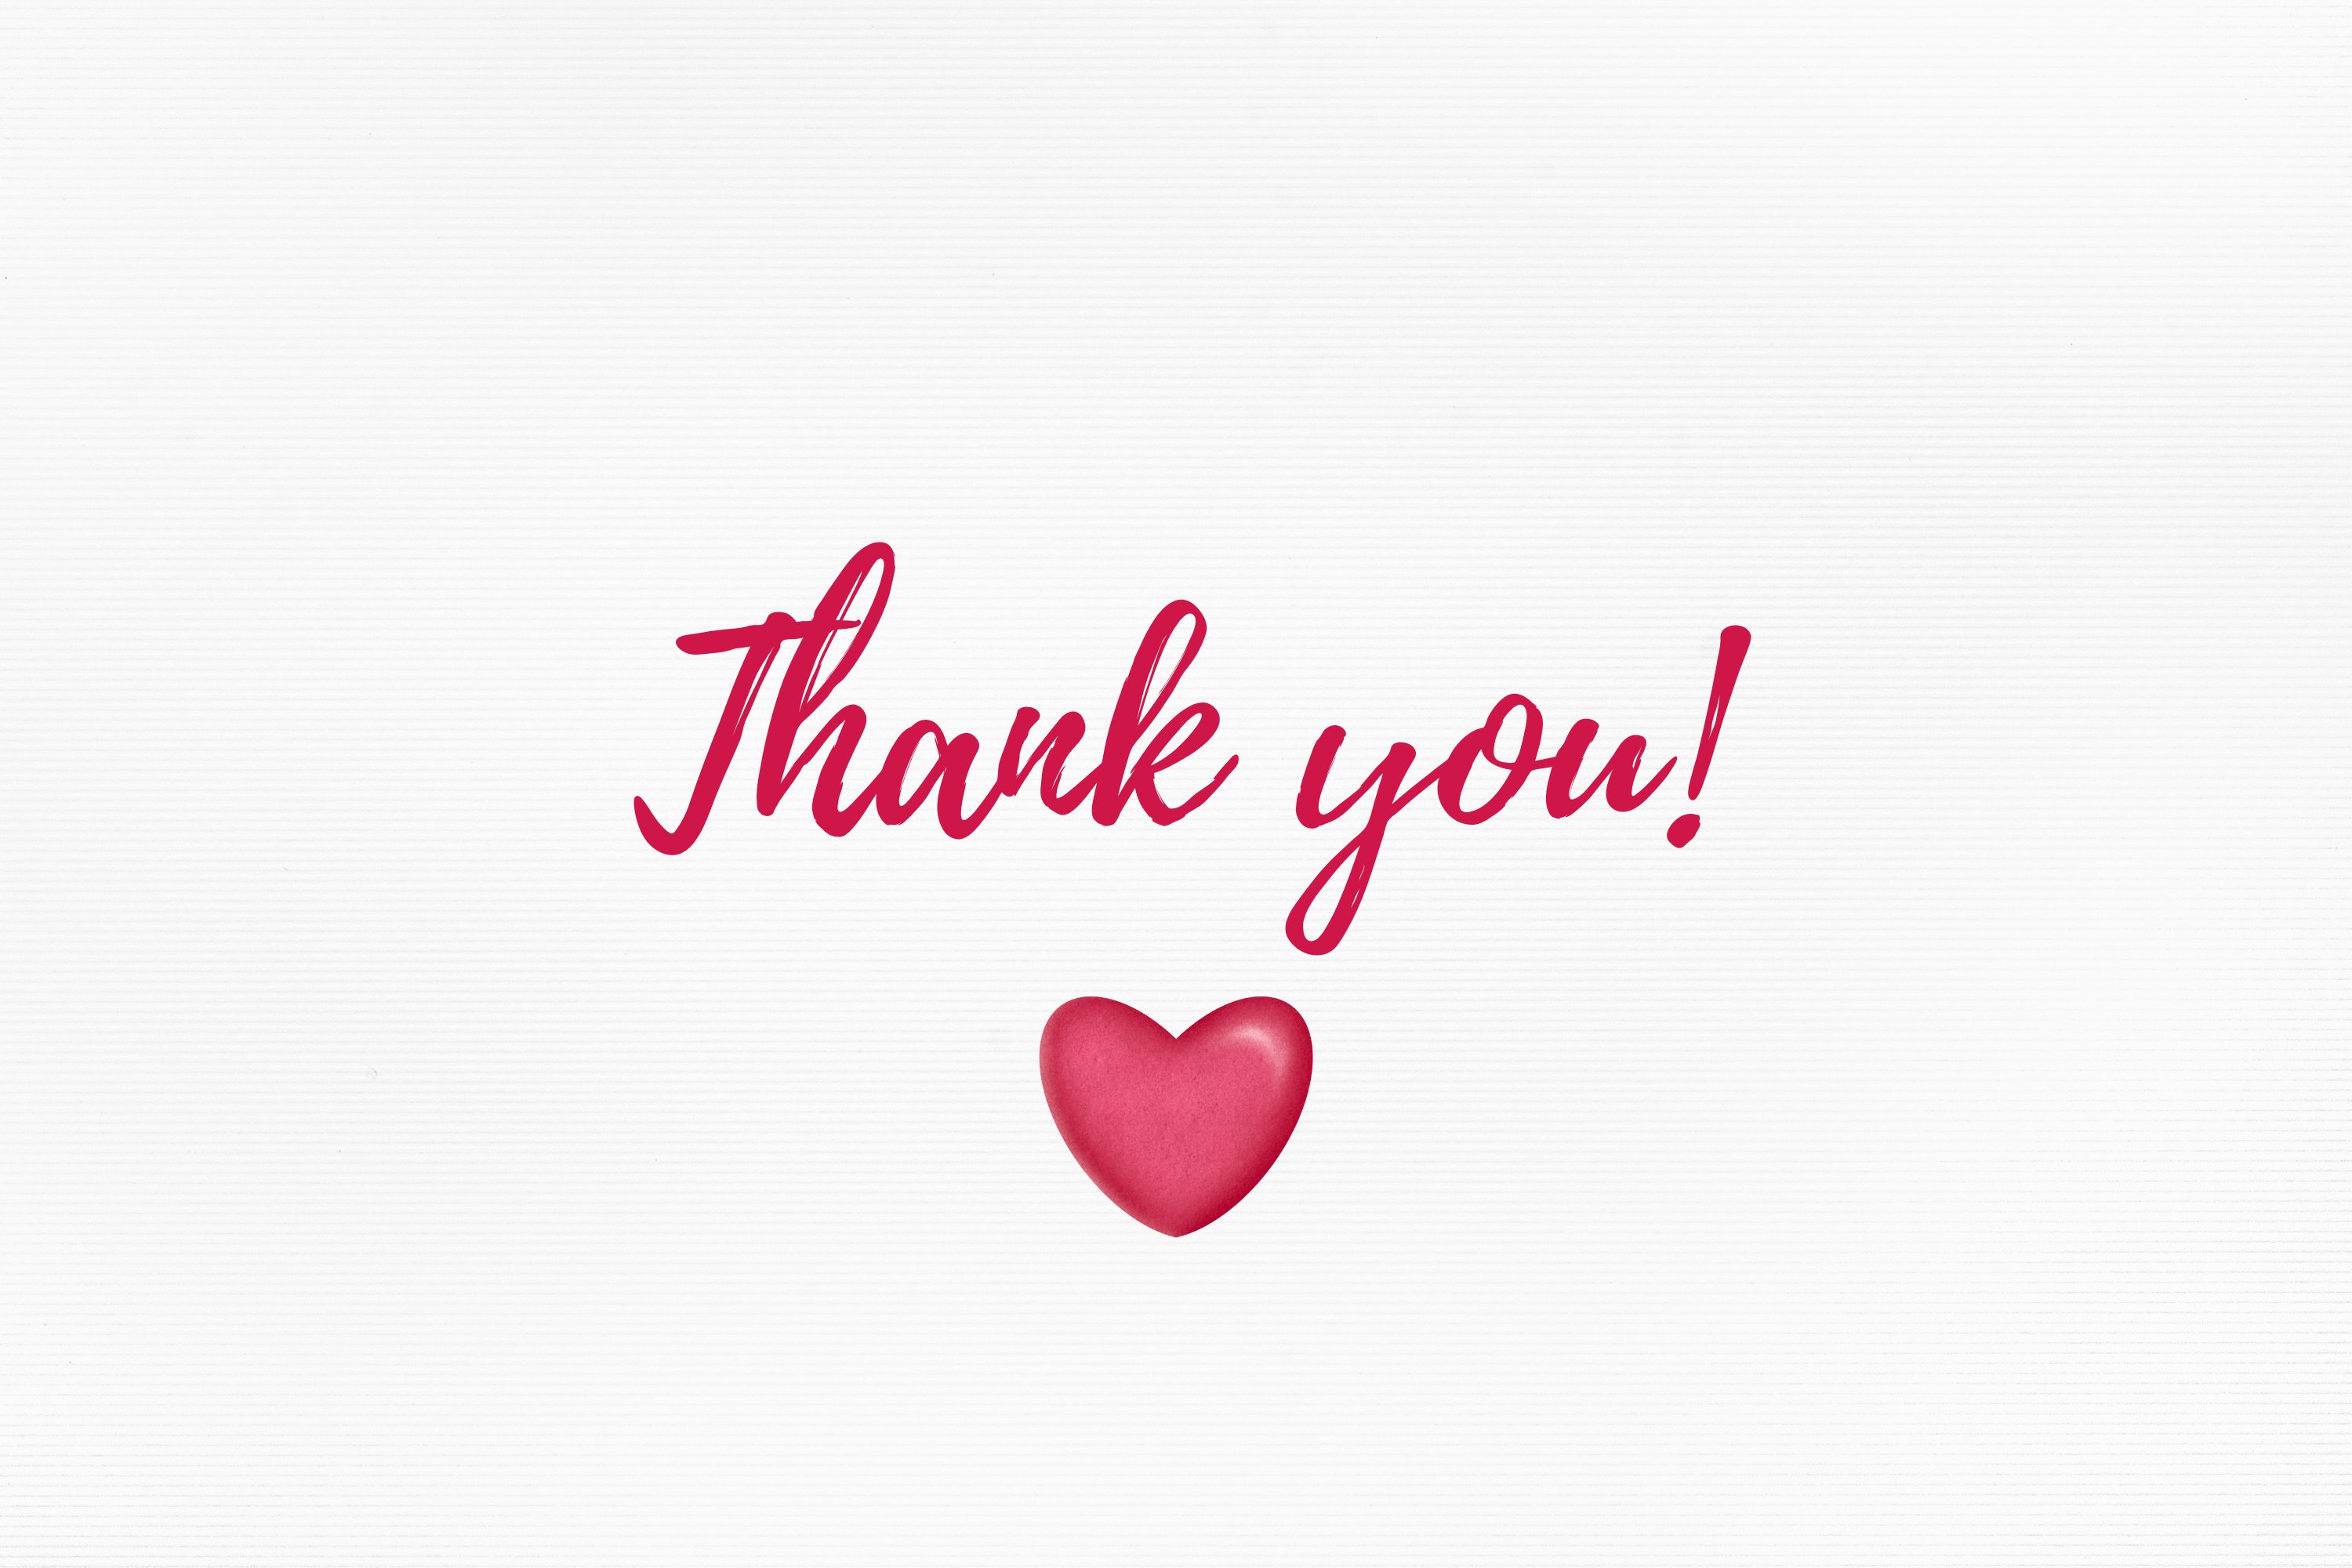 Pink lettering "Thank you!" and illustrations of heart on a gray background.